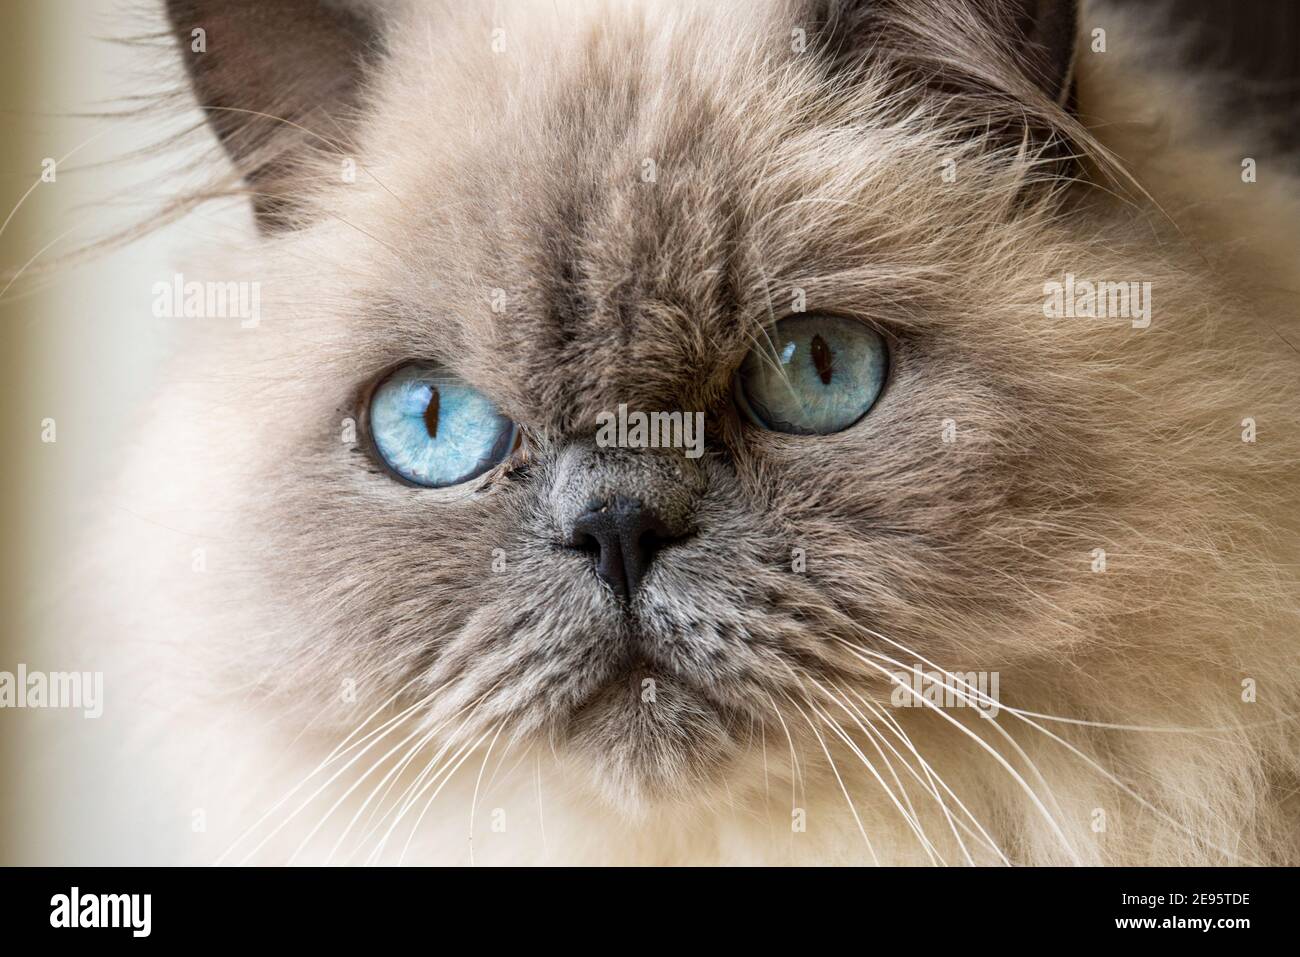 Lovely adult Ragdoll Cat with curious Blue Eyes and fluffy white fur Looking at the camera with tilted head. Stock Photo